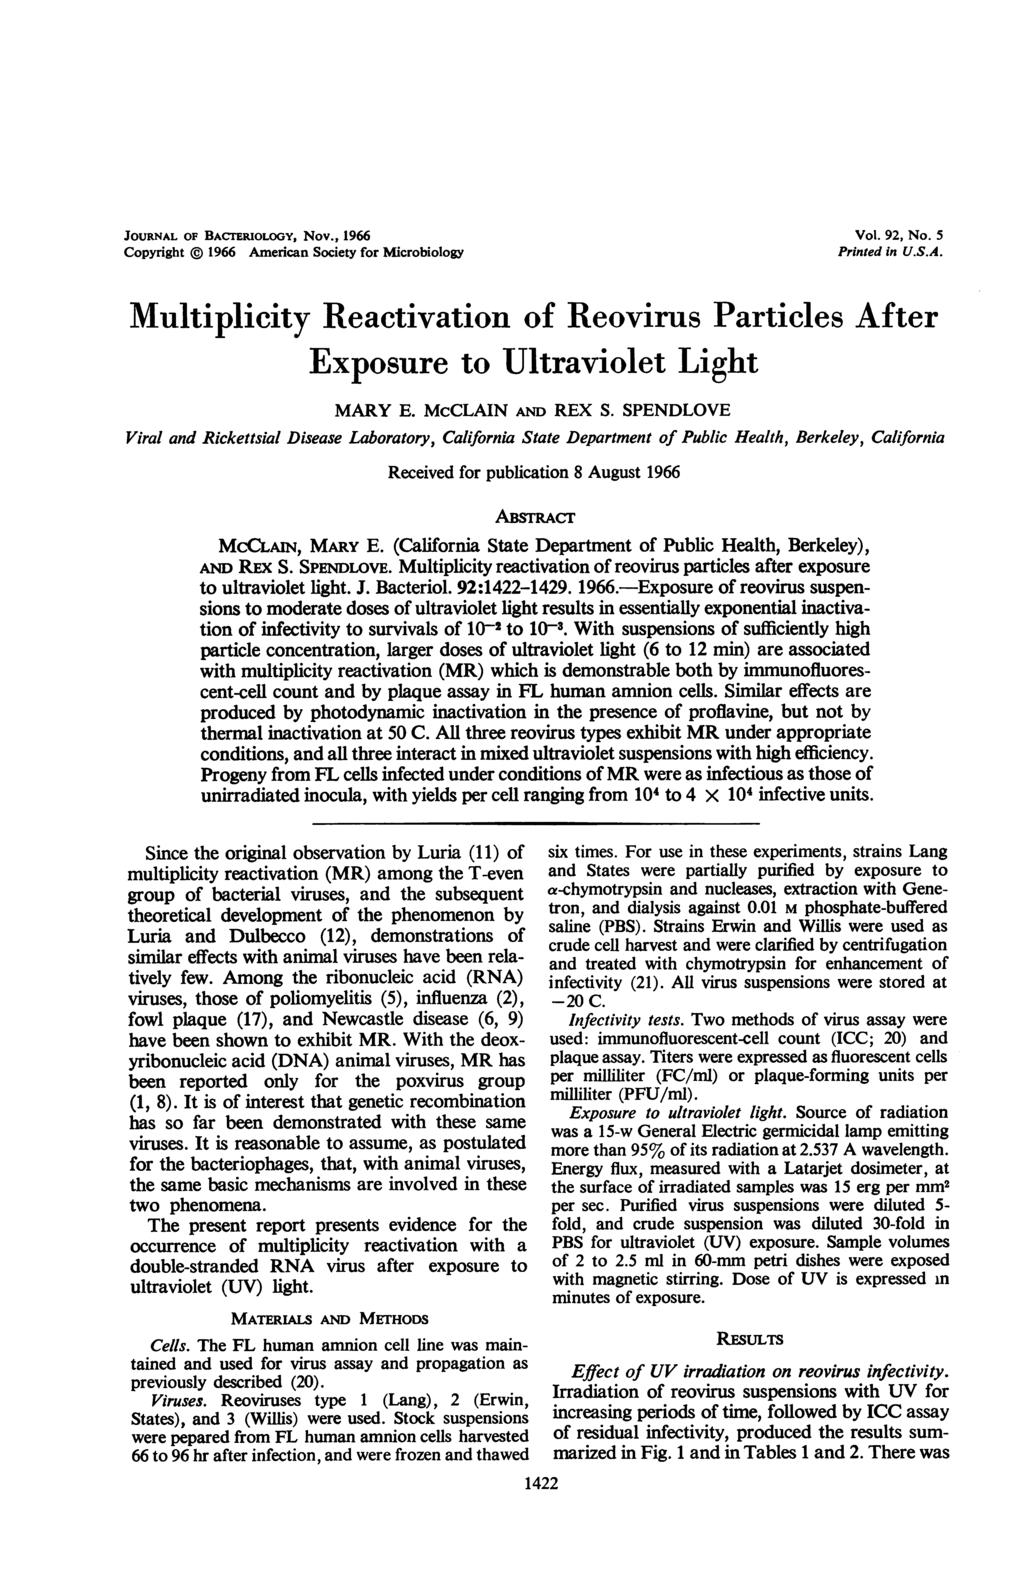 JOURNAL OF BACTERIOLOGY, Nov., 1966 Copyright 1966 American Society for Microbiology Vol. 92, No. 5 Printed in U.S.A. Multiplicity Reactivation of Reovirus Particles After Exposure to Ultraviolet Light MARY E.